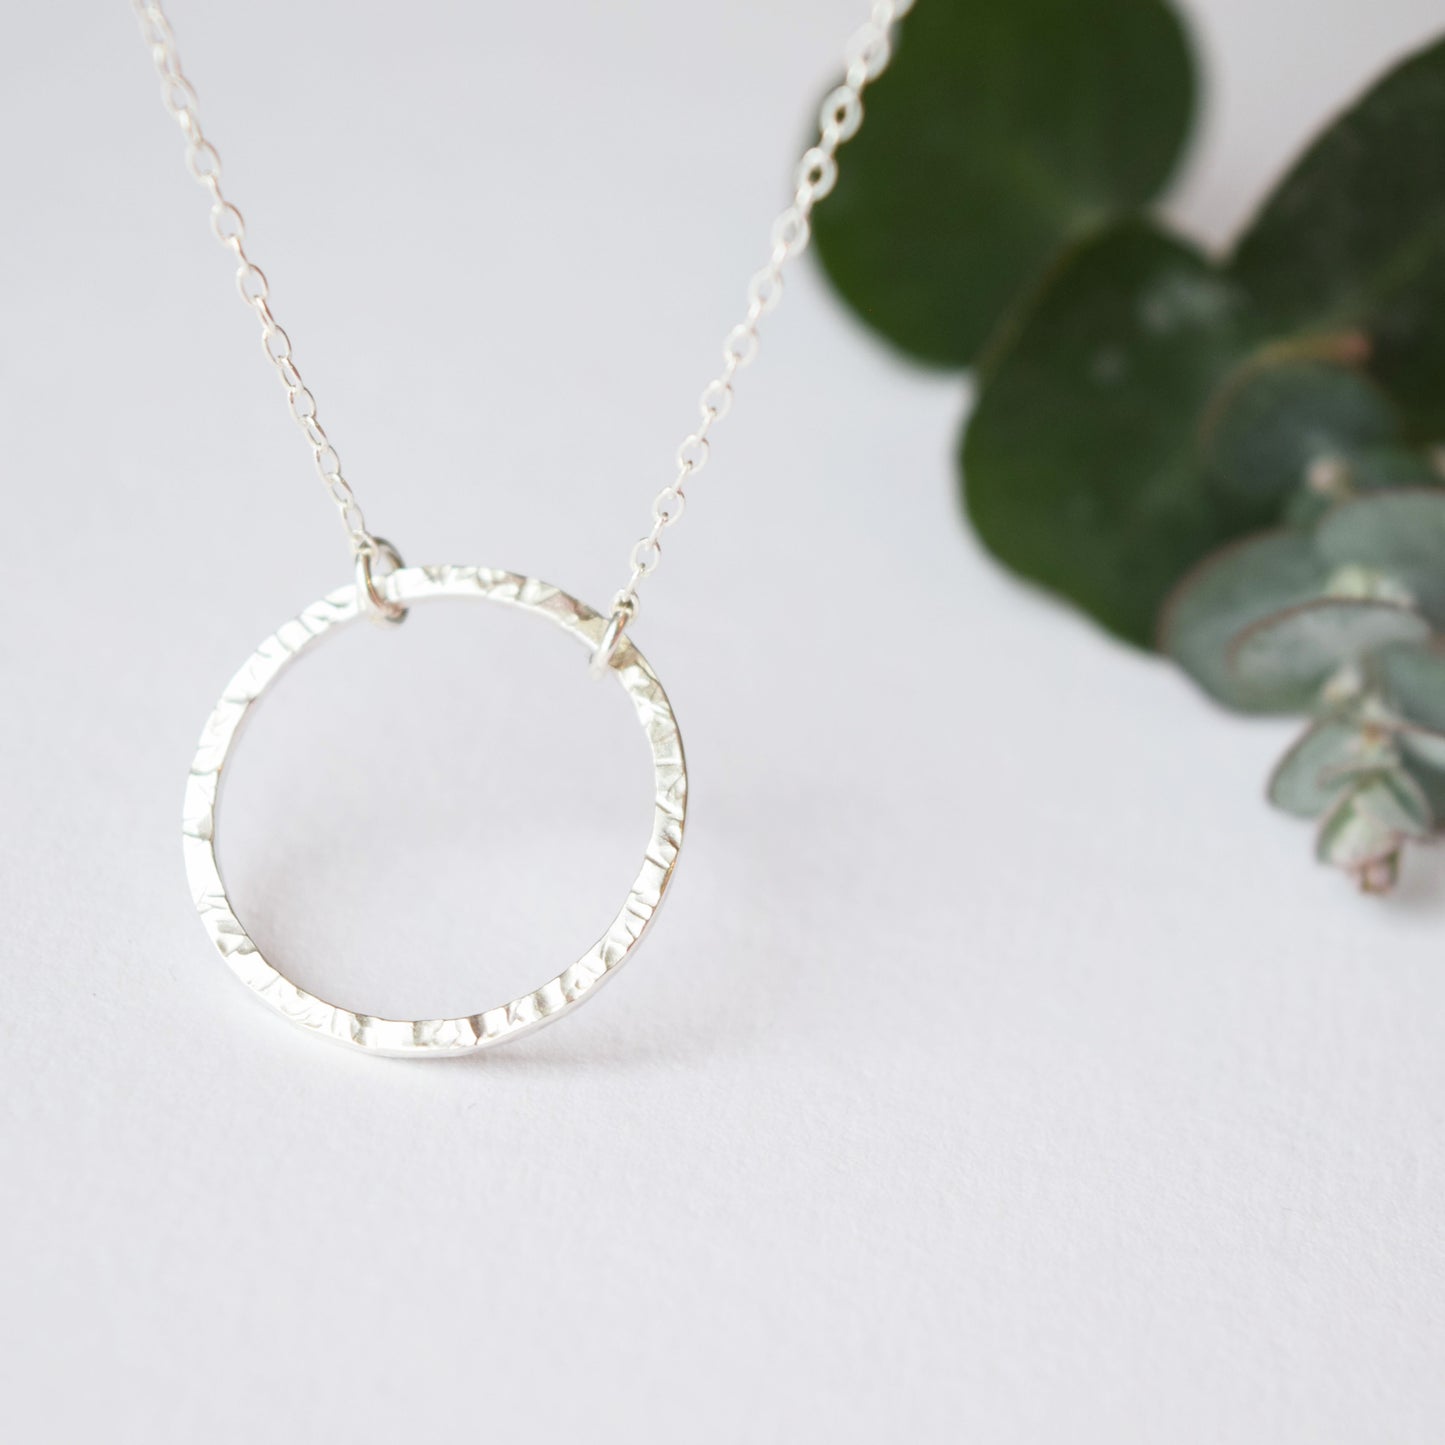 Hammered circle necklace up close